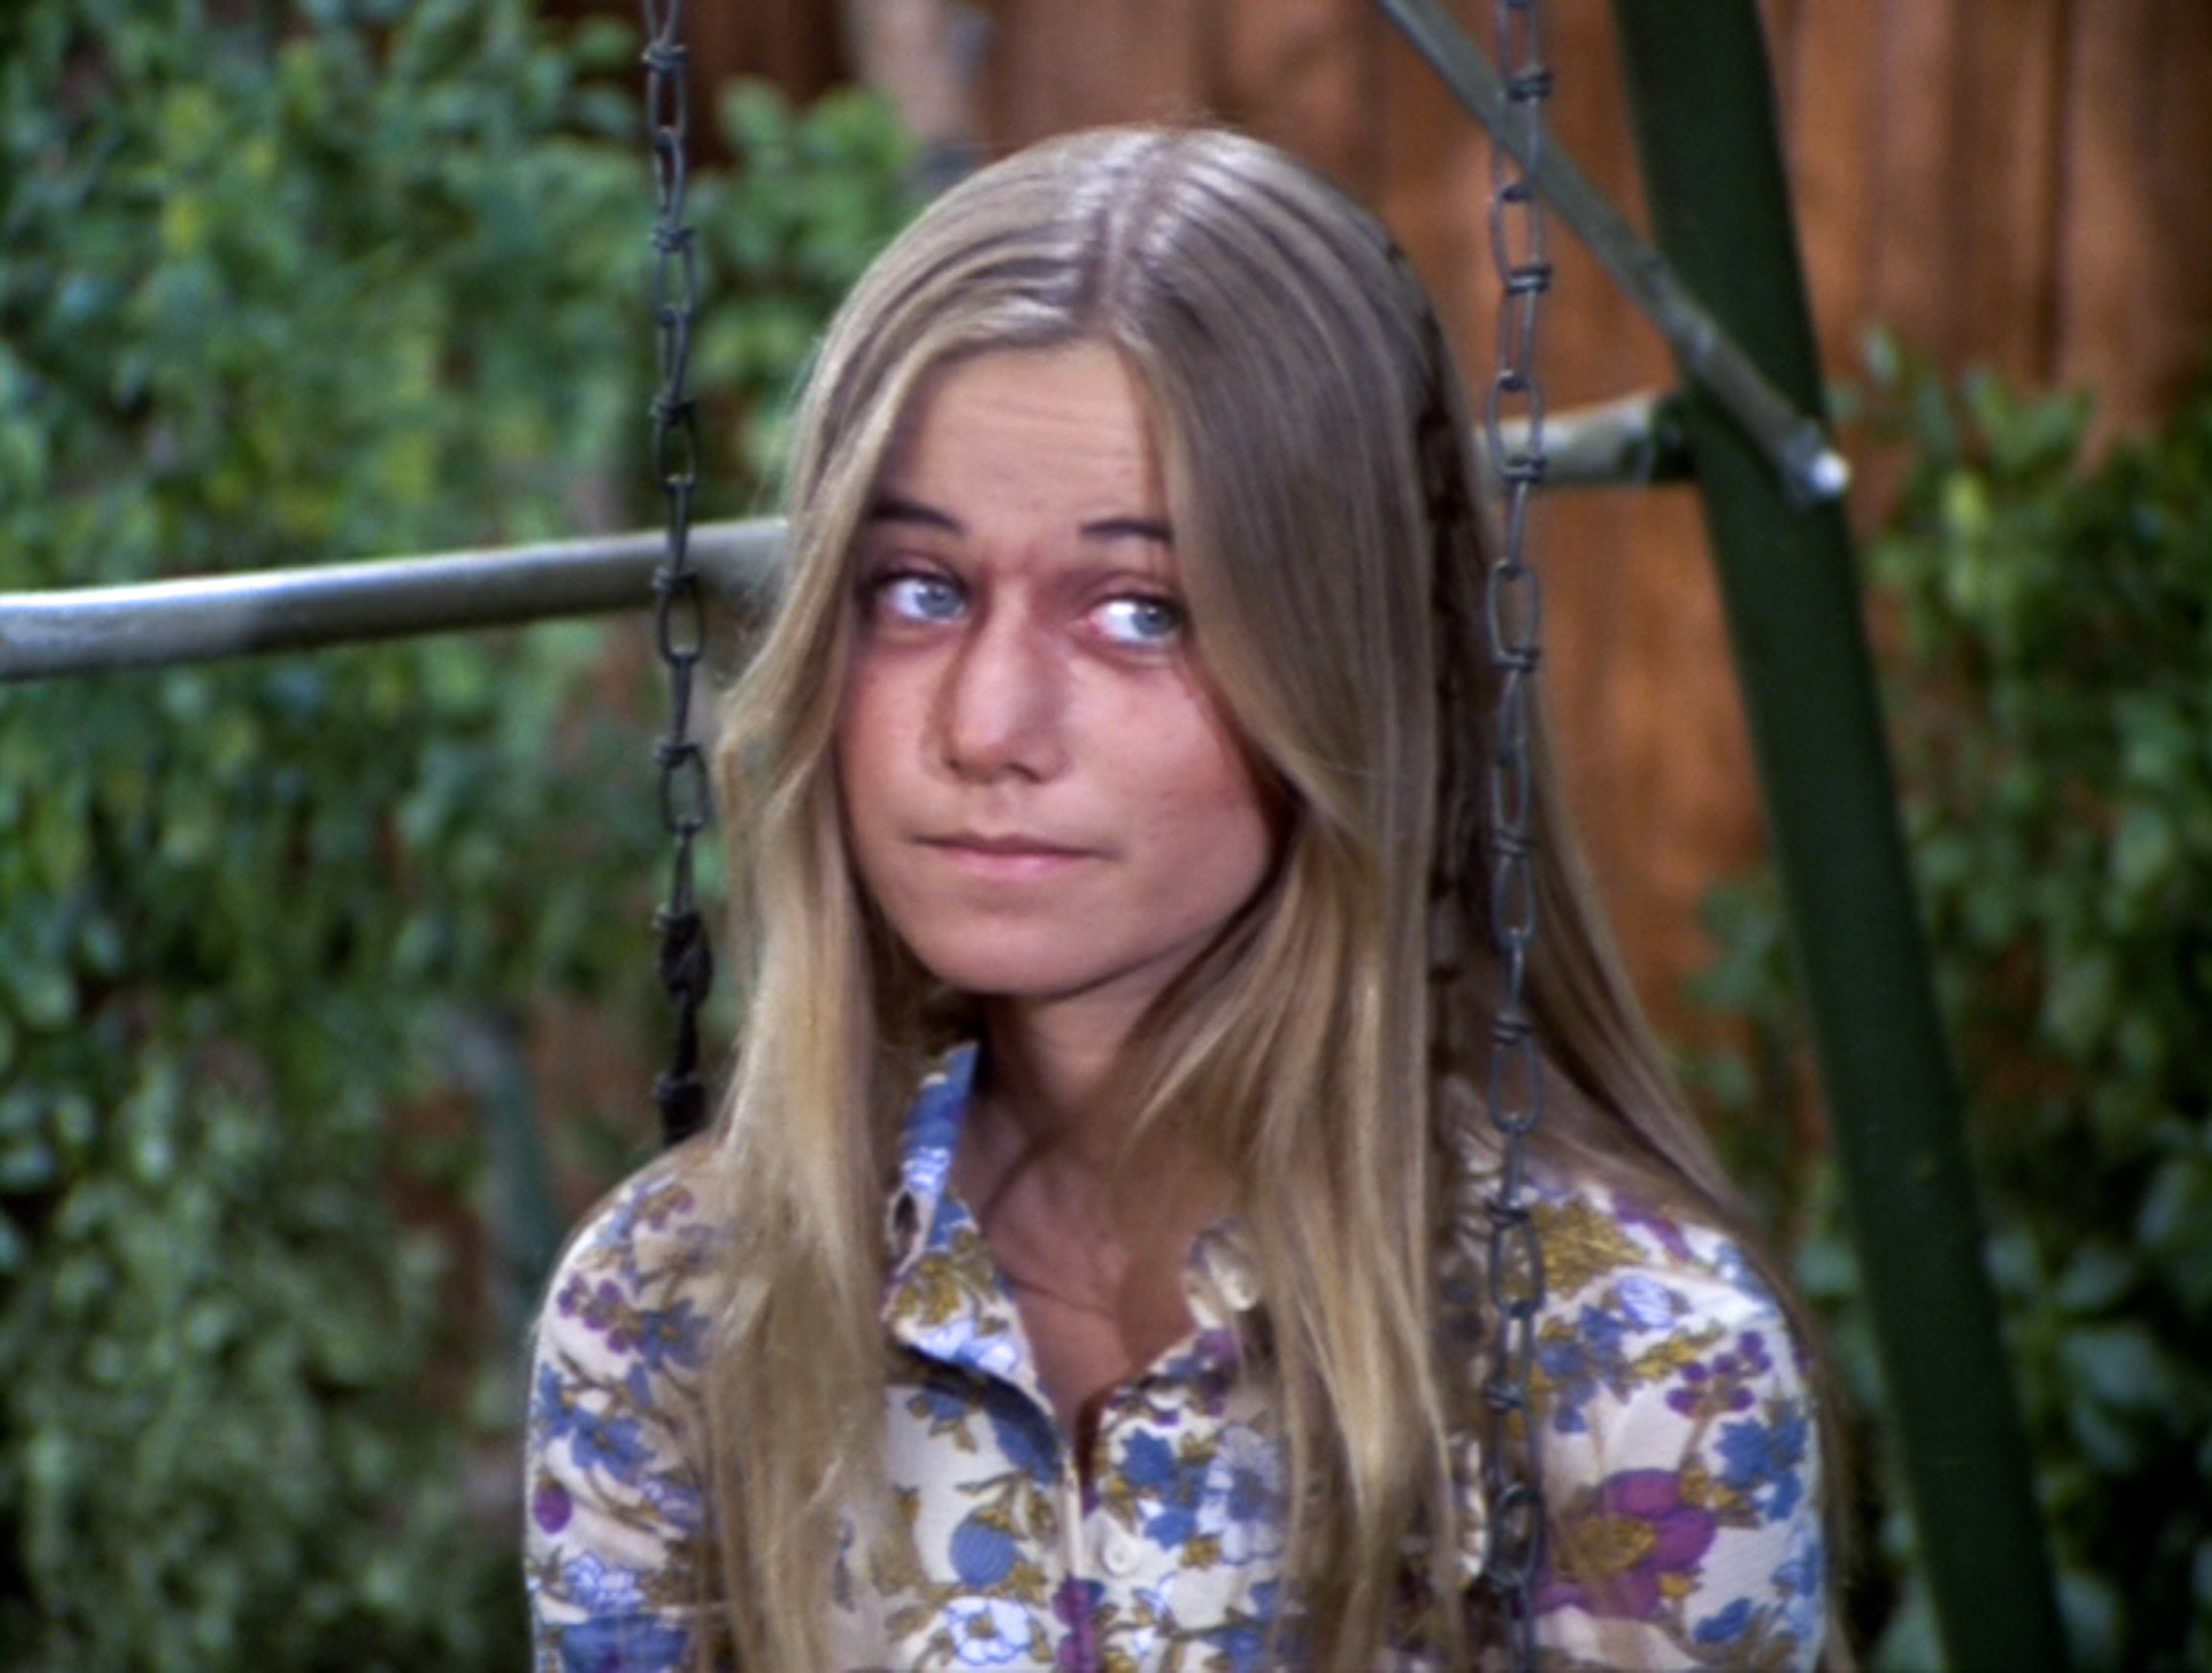 Maureen McCormick as Marcia Brady in "The Subject Was Noses" episode of "The Brady Bunch" in Los Angeles, 1973 | Source: Getty Images